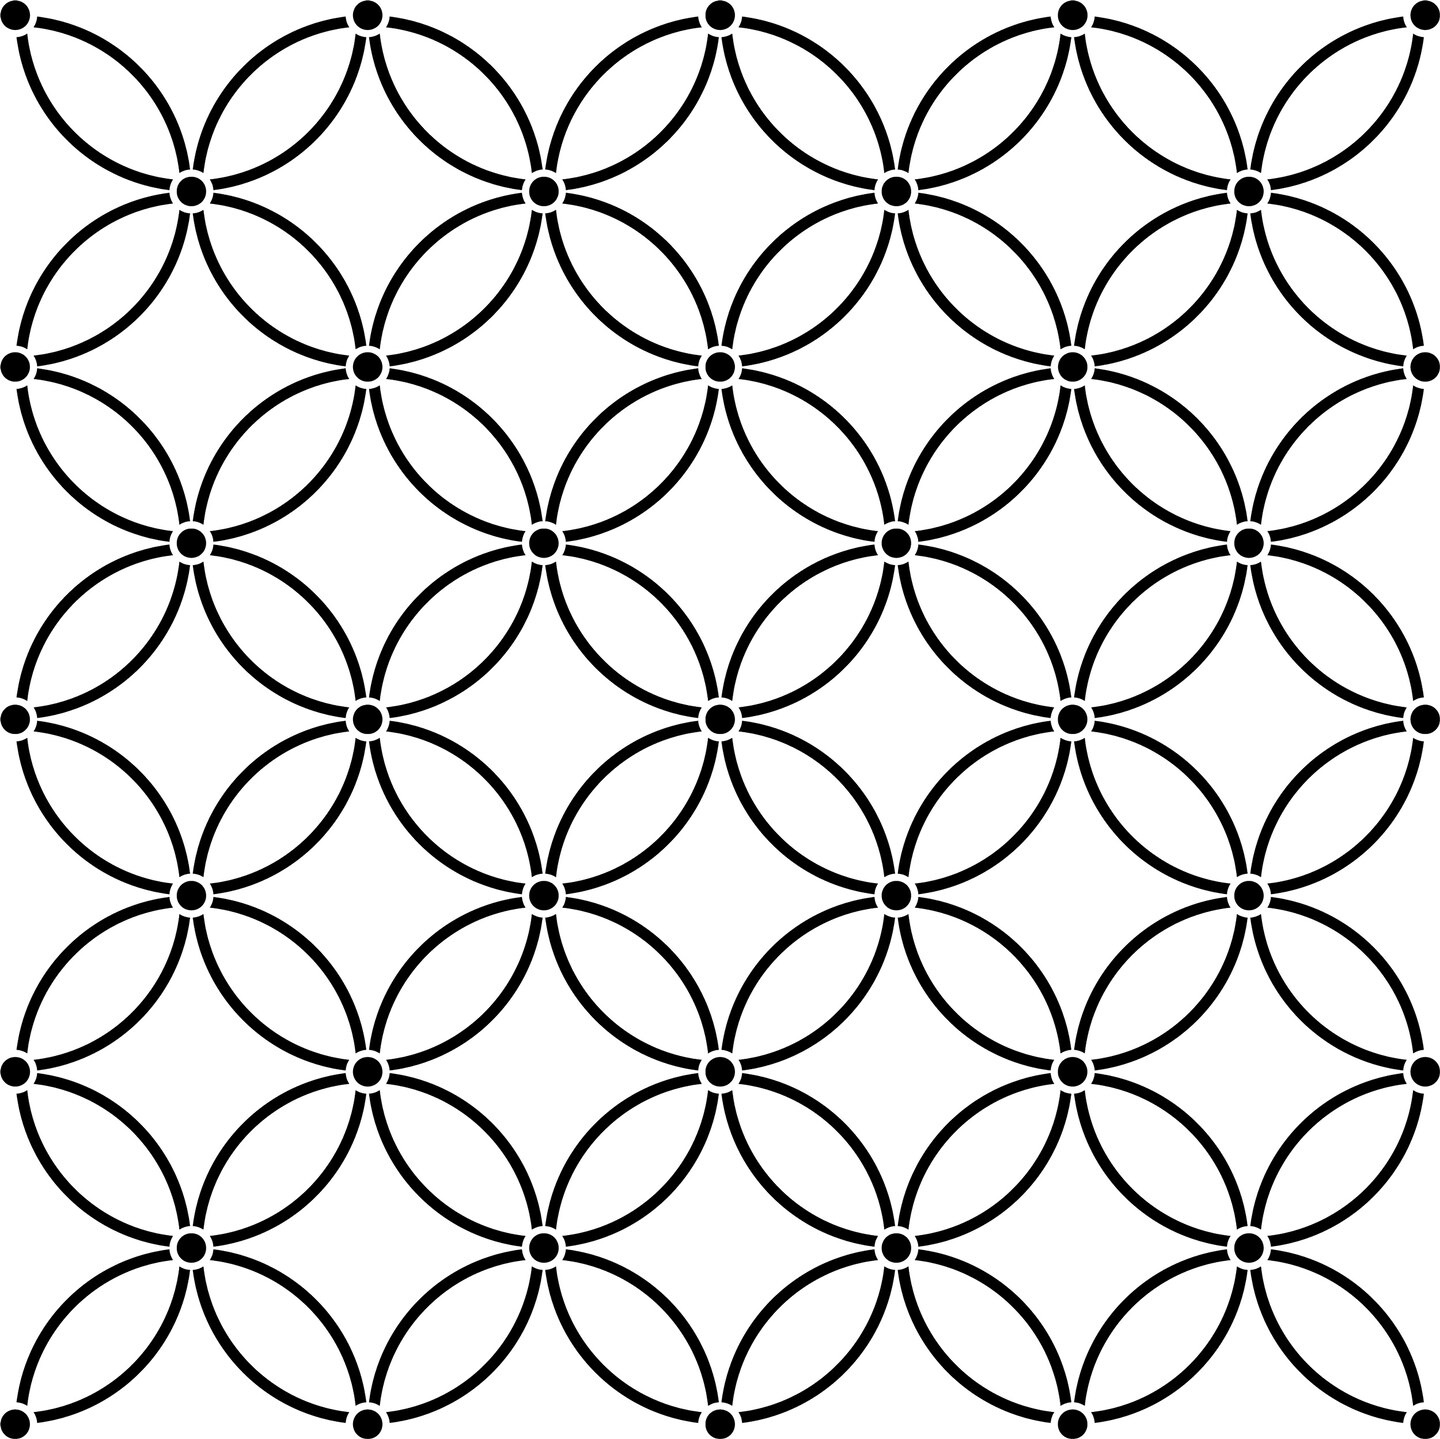 Interlocking Circles All Over Embossing 12 x 12 Stencil | FS031 by Designer Stencils | Pattern Stencils | Reusable Stencils for Painting on Wood, Wall, Tile, Canvas, Paper, Fabric, Furniture, Floor | Try Instead of a Wallpaper | Easy to Use &#x26; Clean